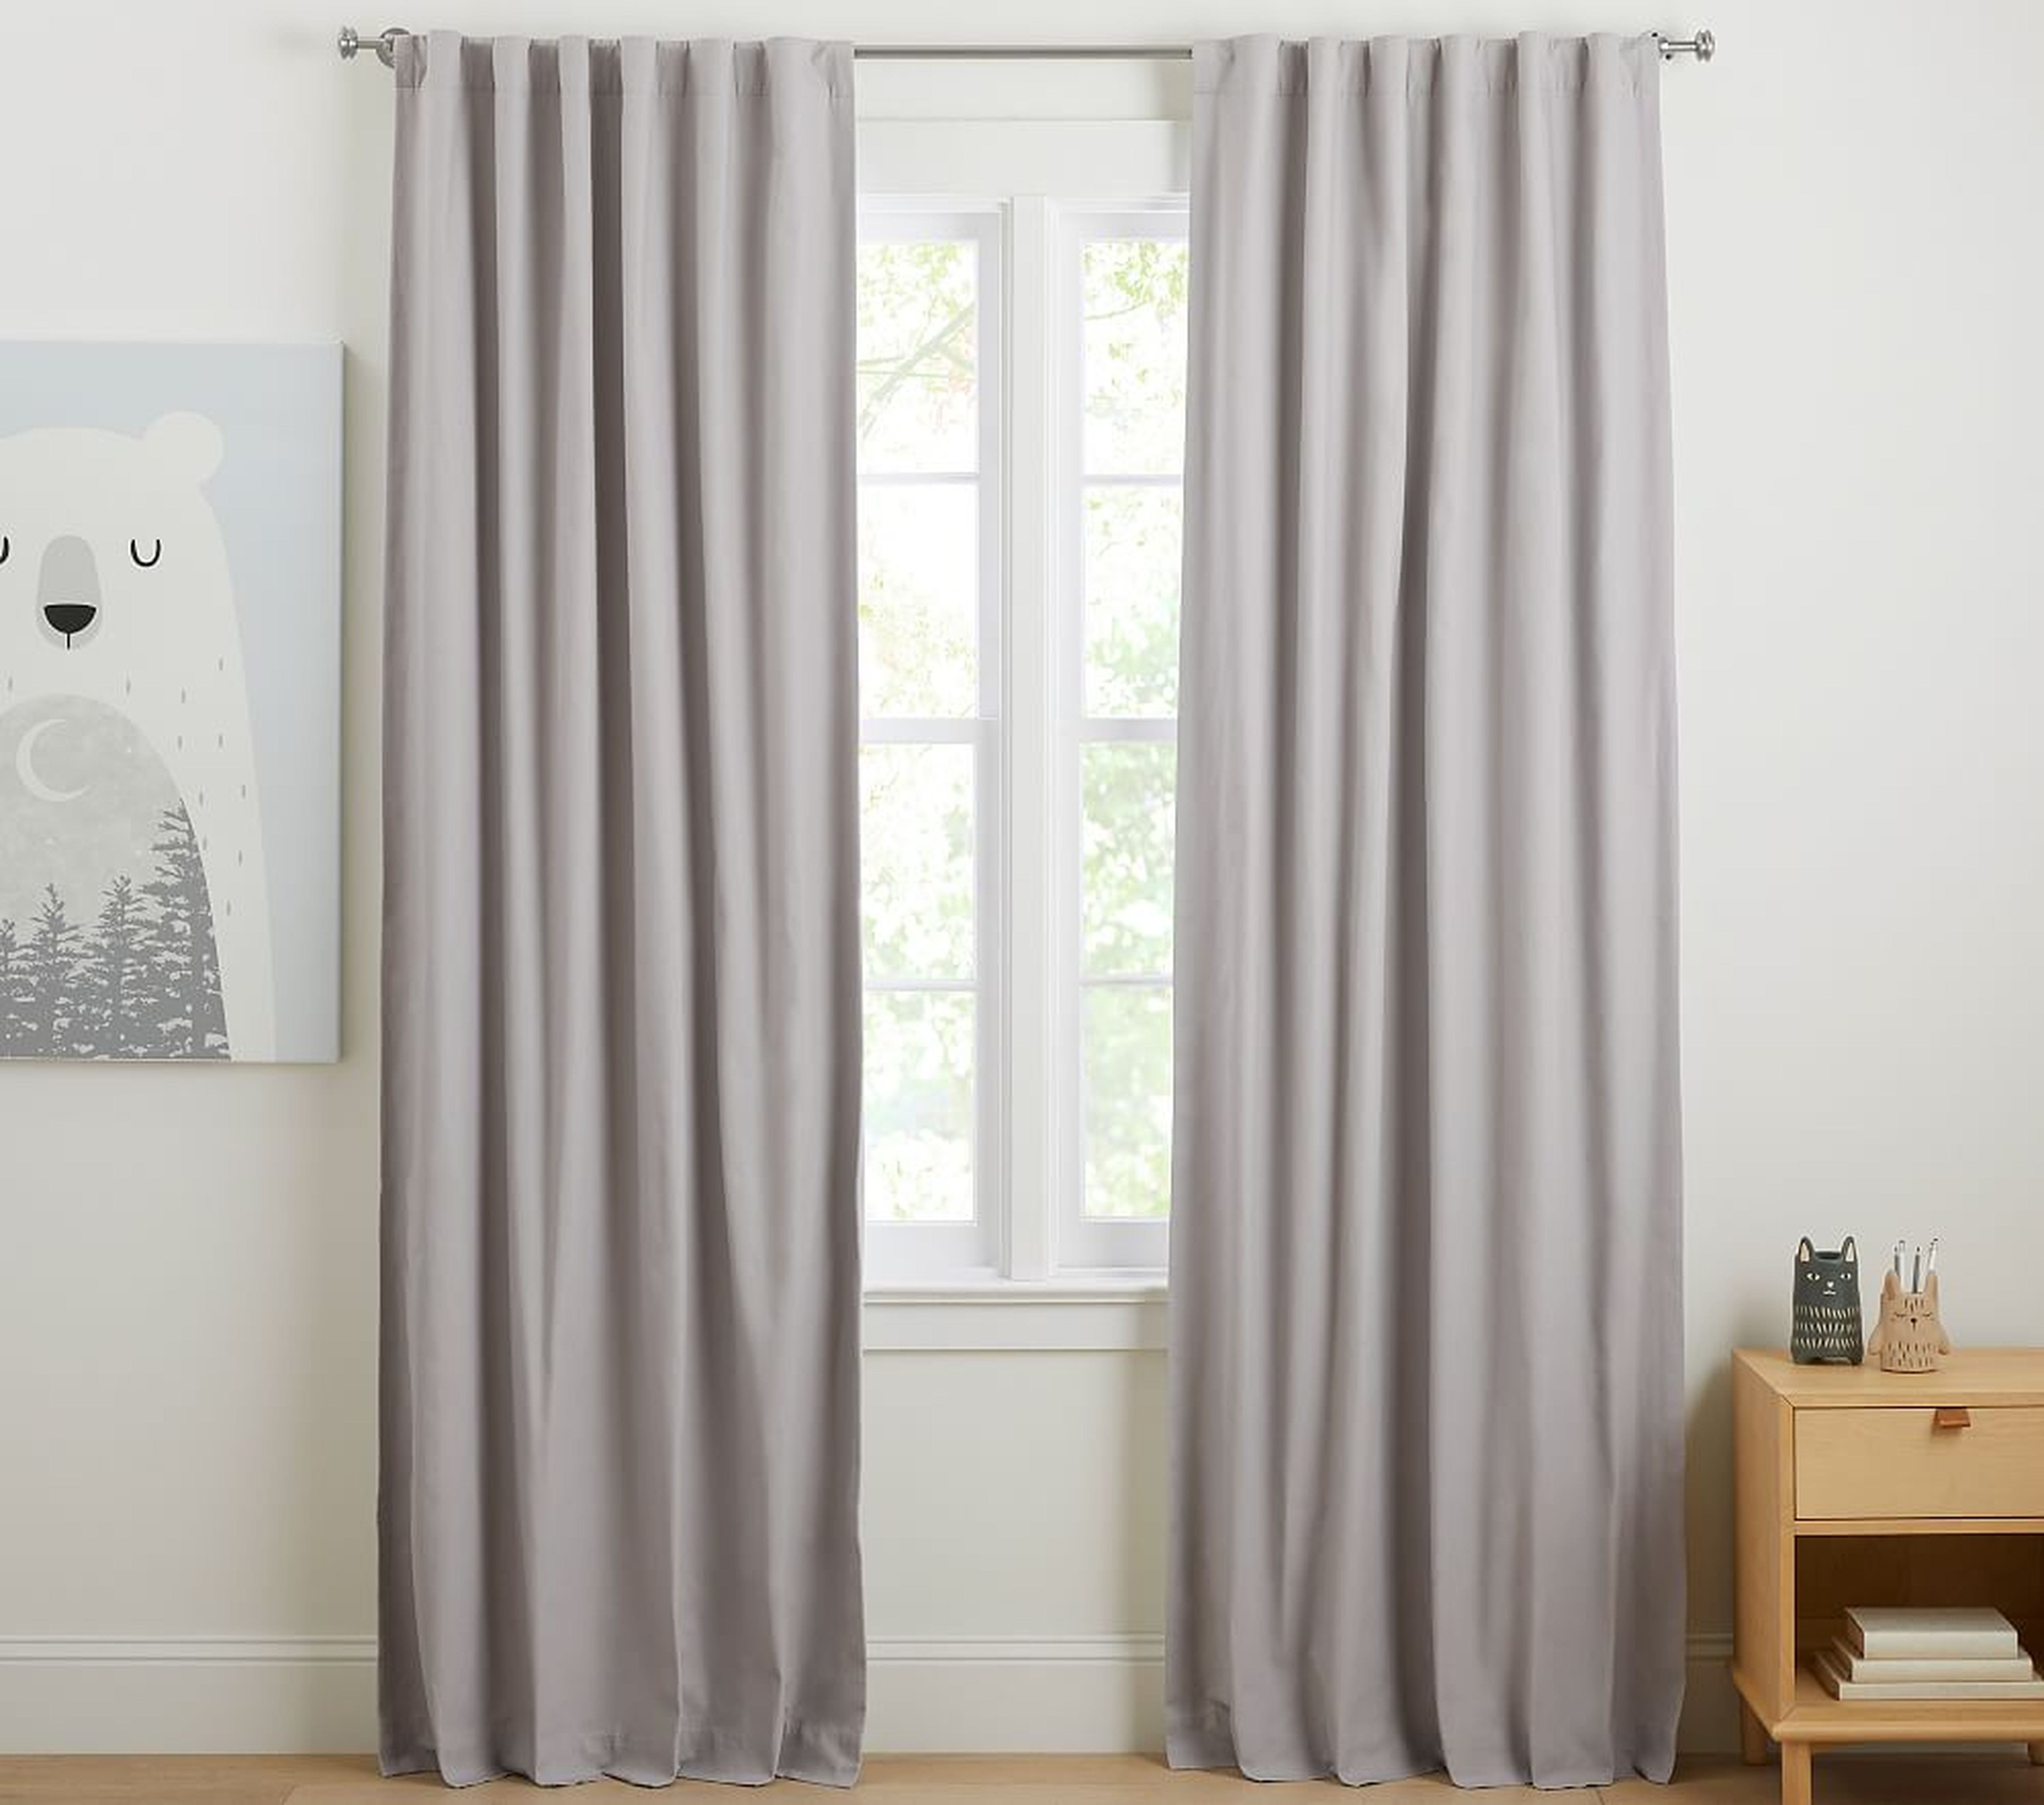 Soothing Sleep Noise Reducing Blackout Curtain, Gray, 44" x 96", Set of 2 - Pottery Barn Kids